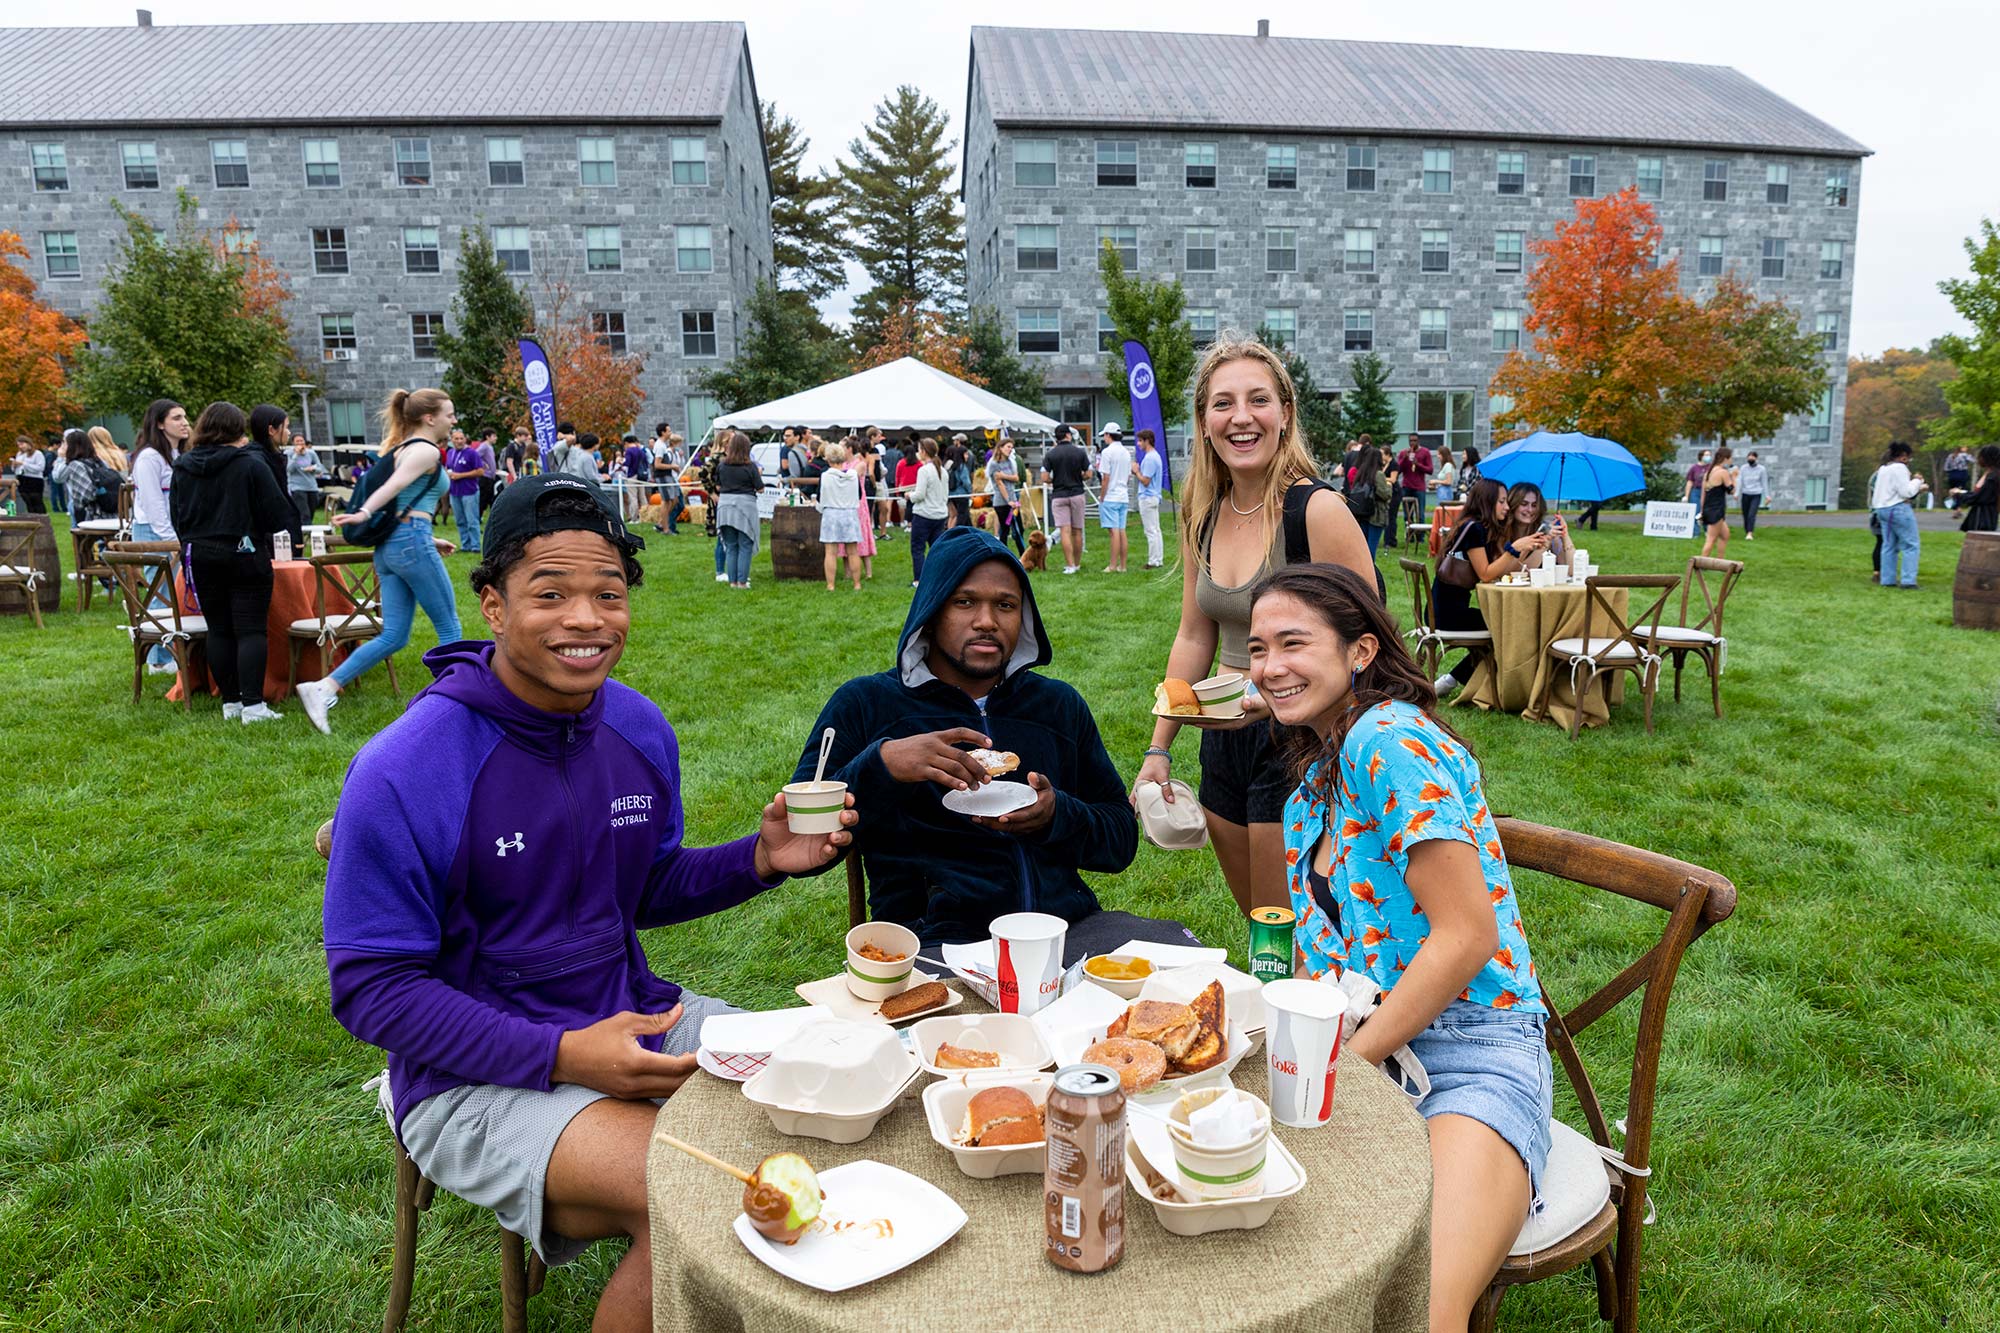 Students sample a variety of food options at the bicentennial party